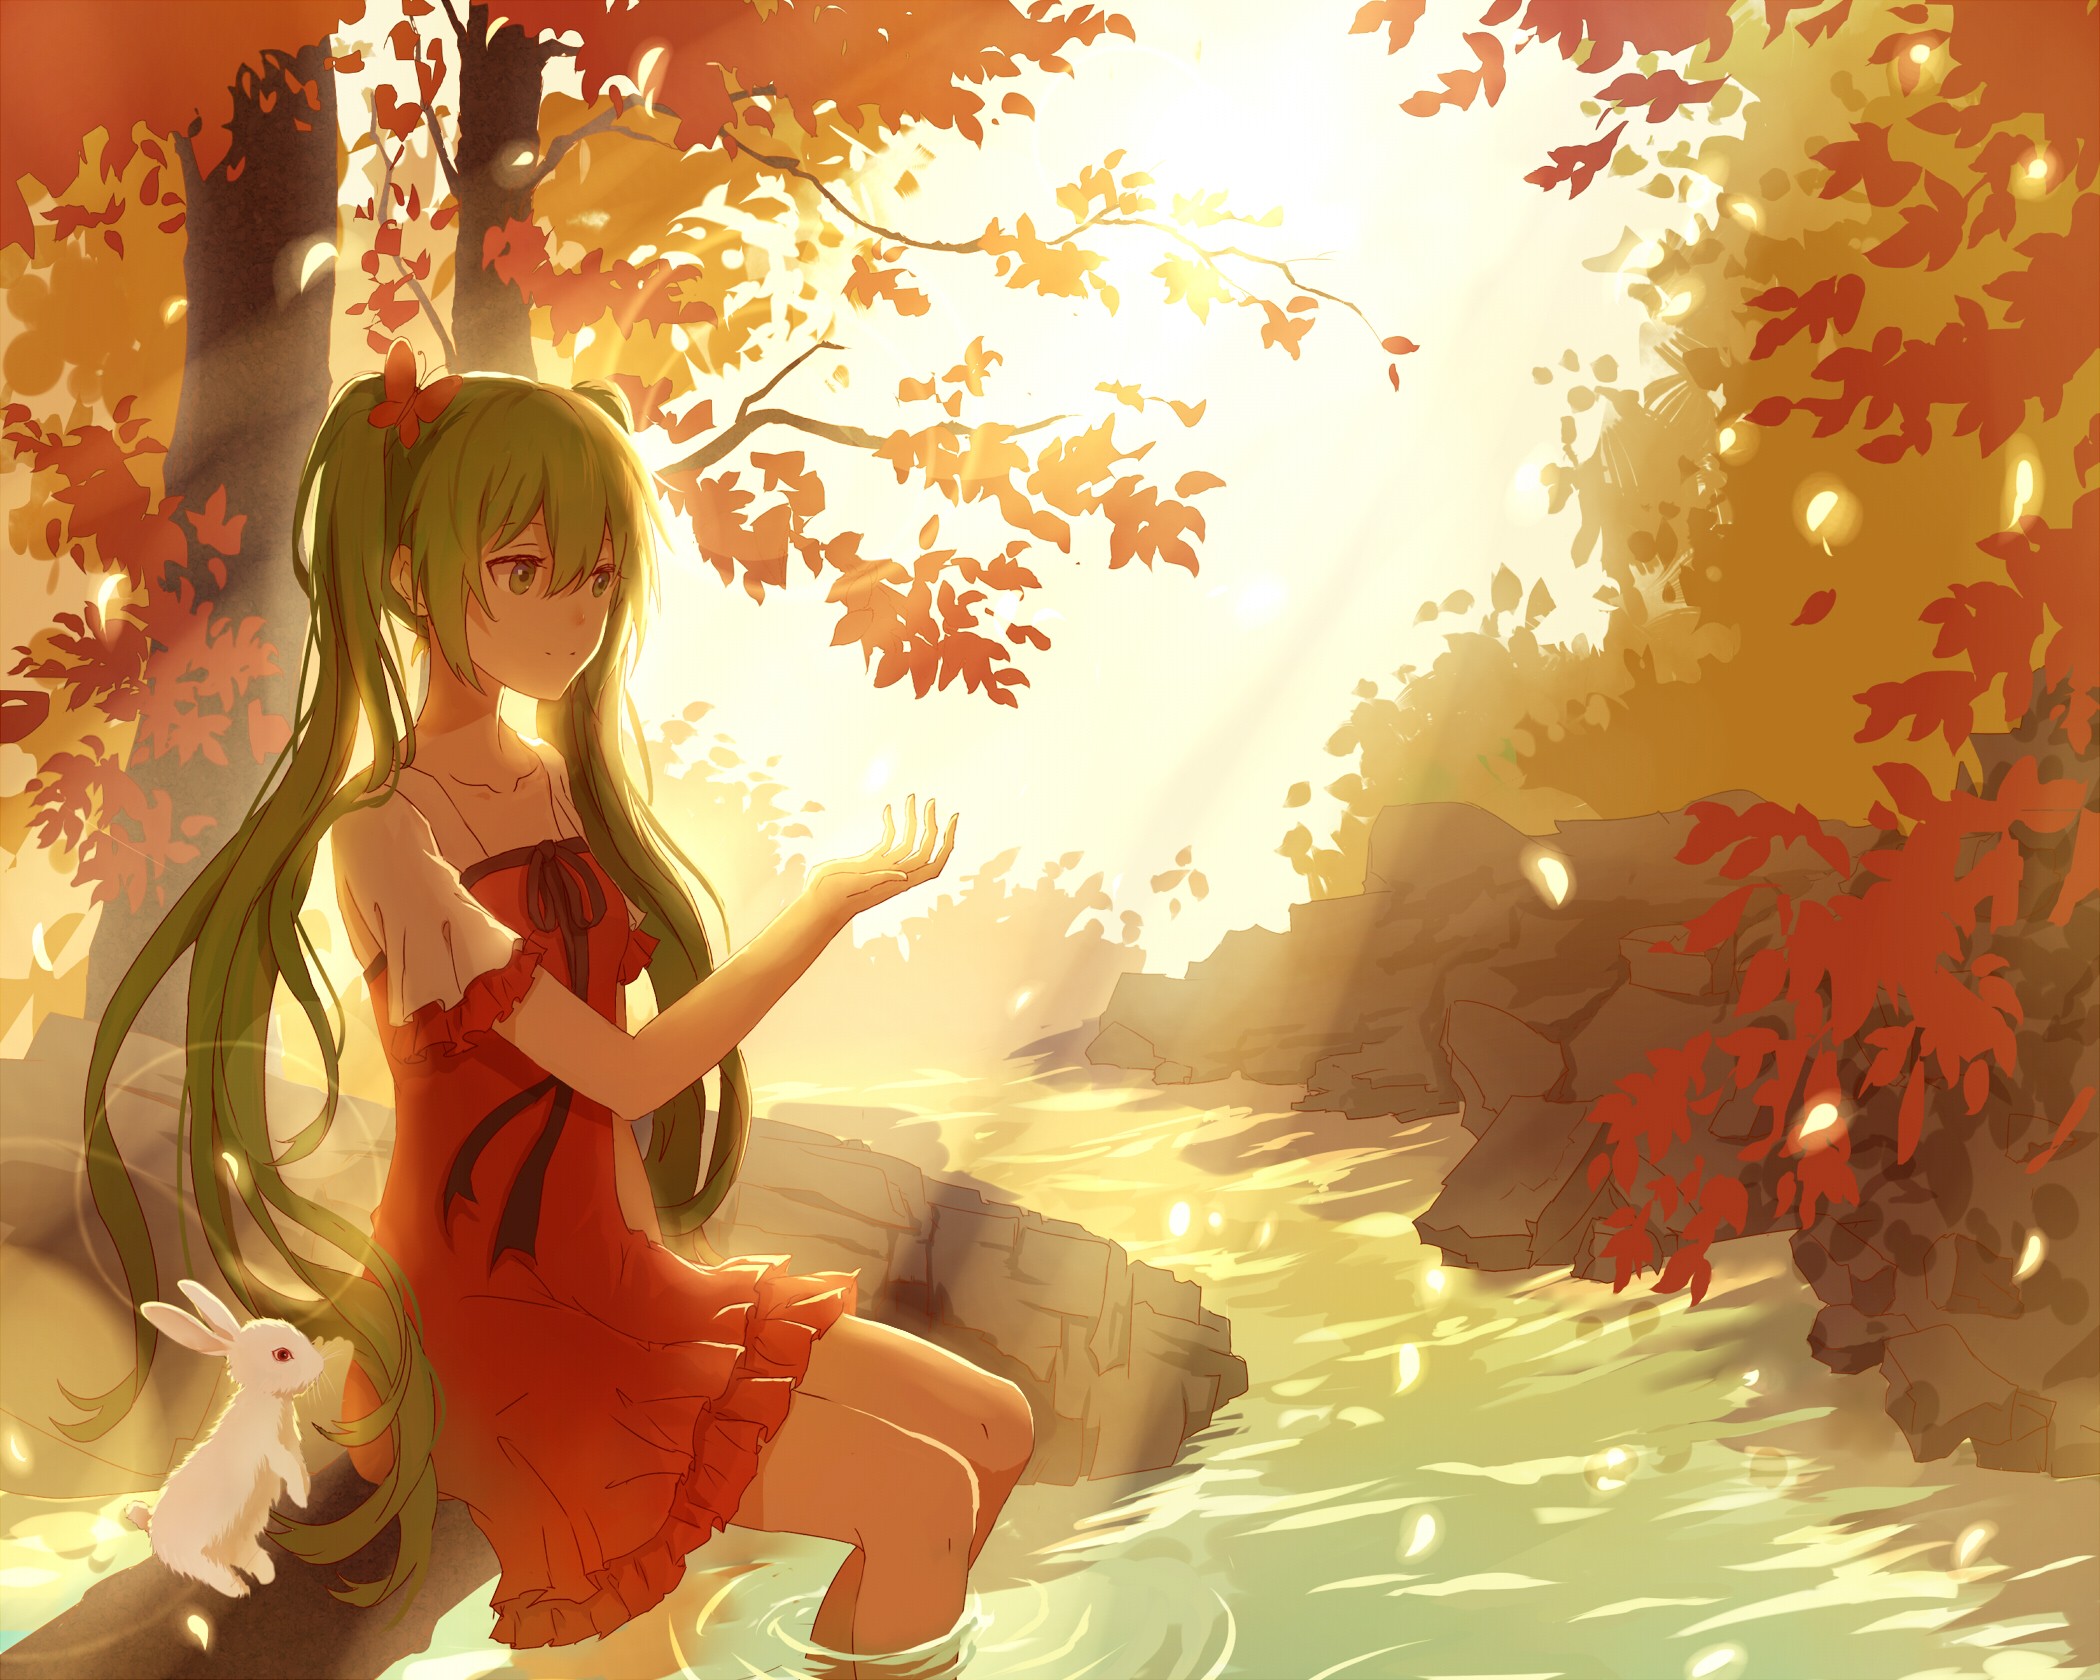 Anime 2100x1680 Vocaloid Hatsune Miku twintails ribbon forest petals anime girls anime rabbits animals mammals sunlight sitting red clothing long hair